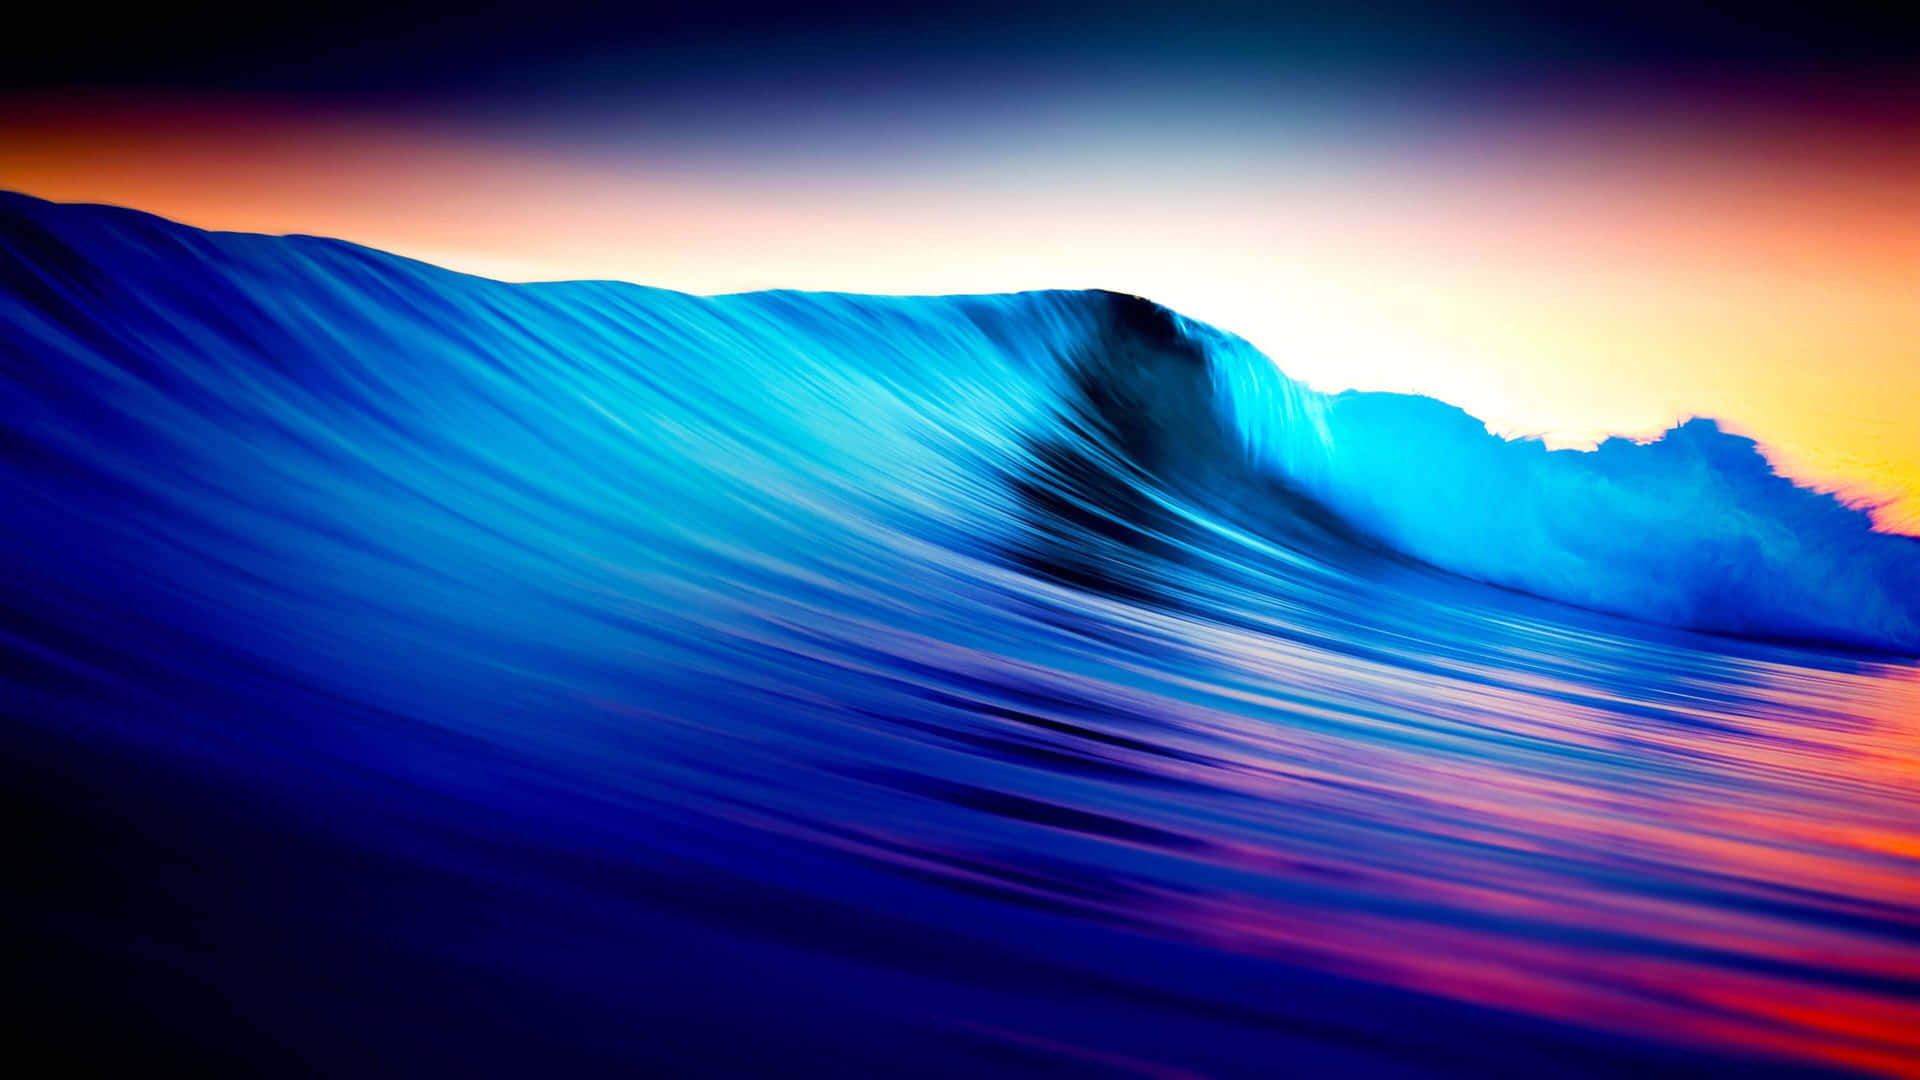 A Blue And Orange Wave At Sunset Wallpaper